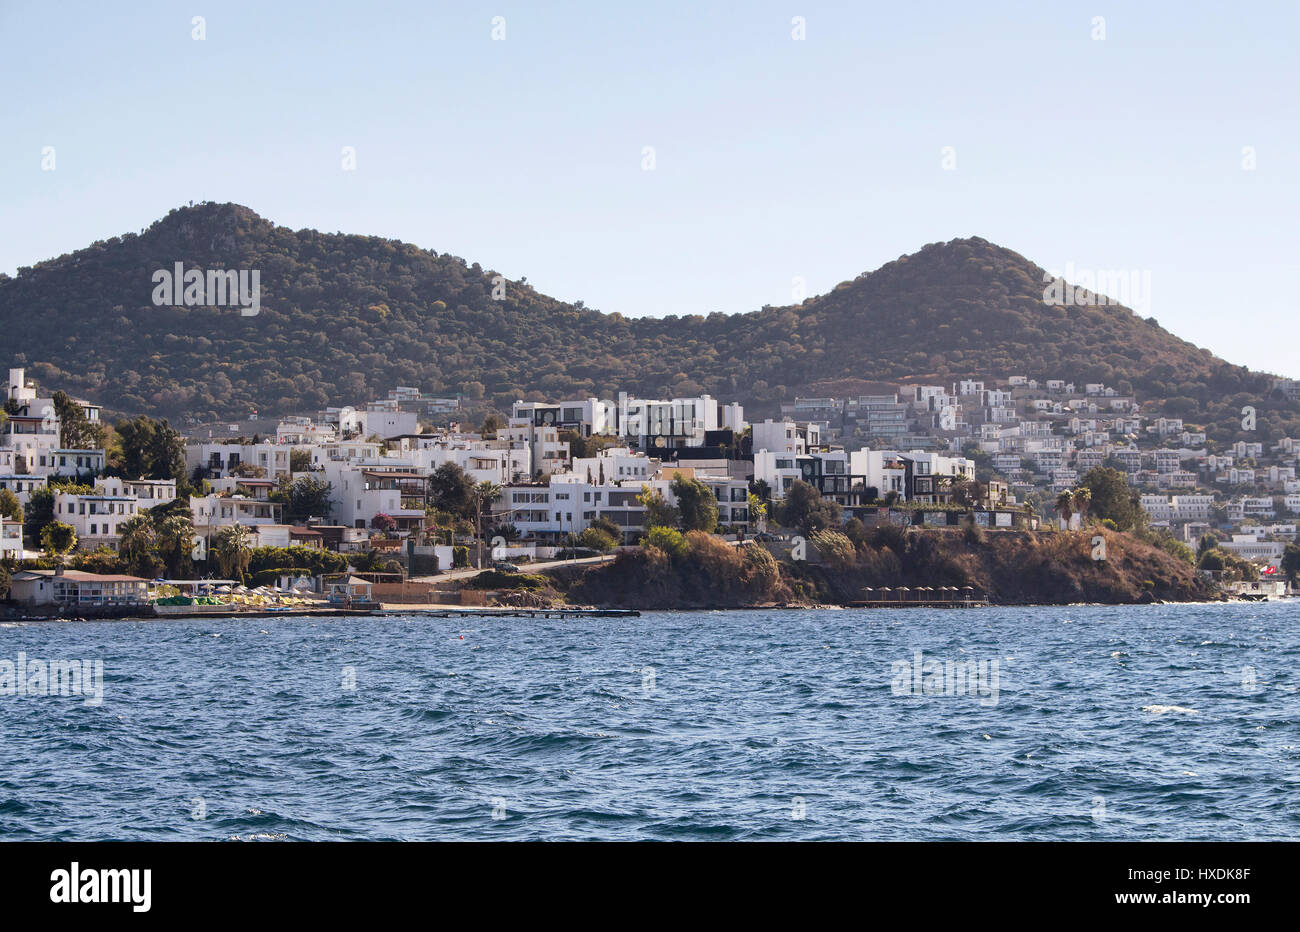 Village full of summer houses in Yalikavak area in Bodrum peninsula. Architectural style of the region is all white homes. Stock Photo